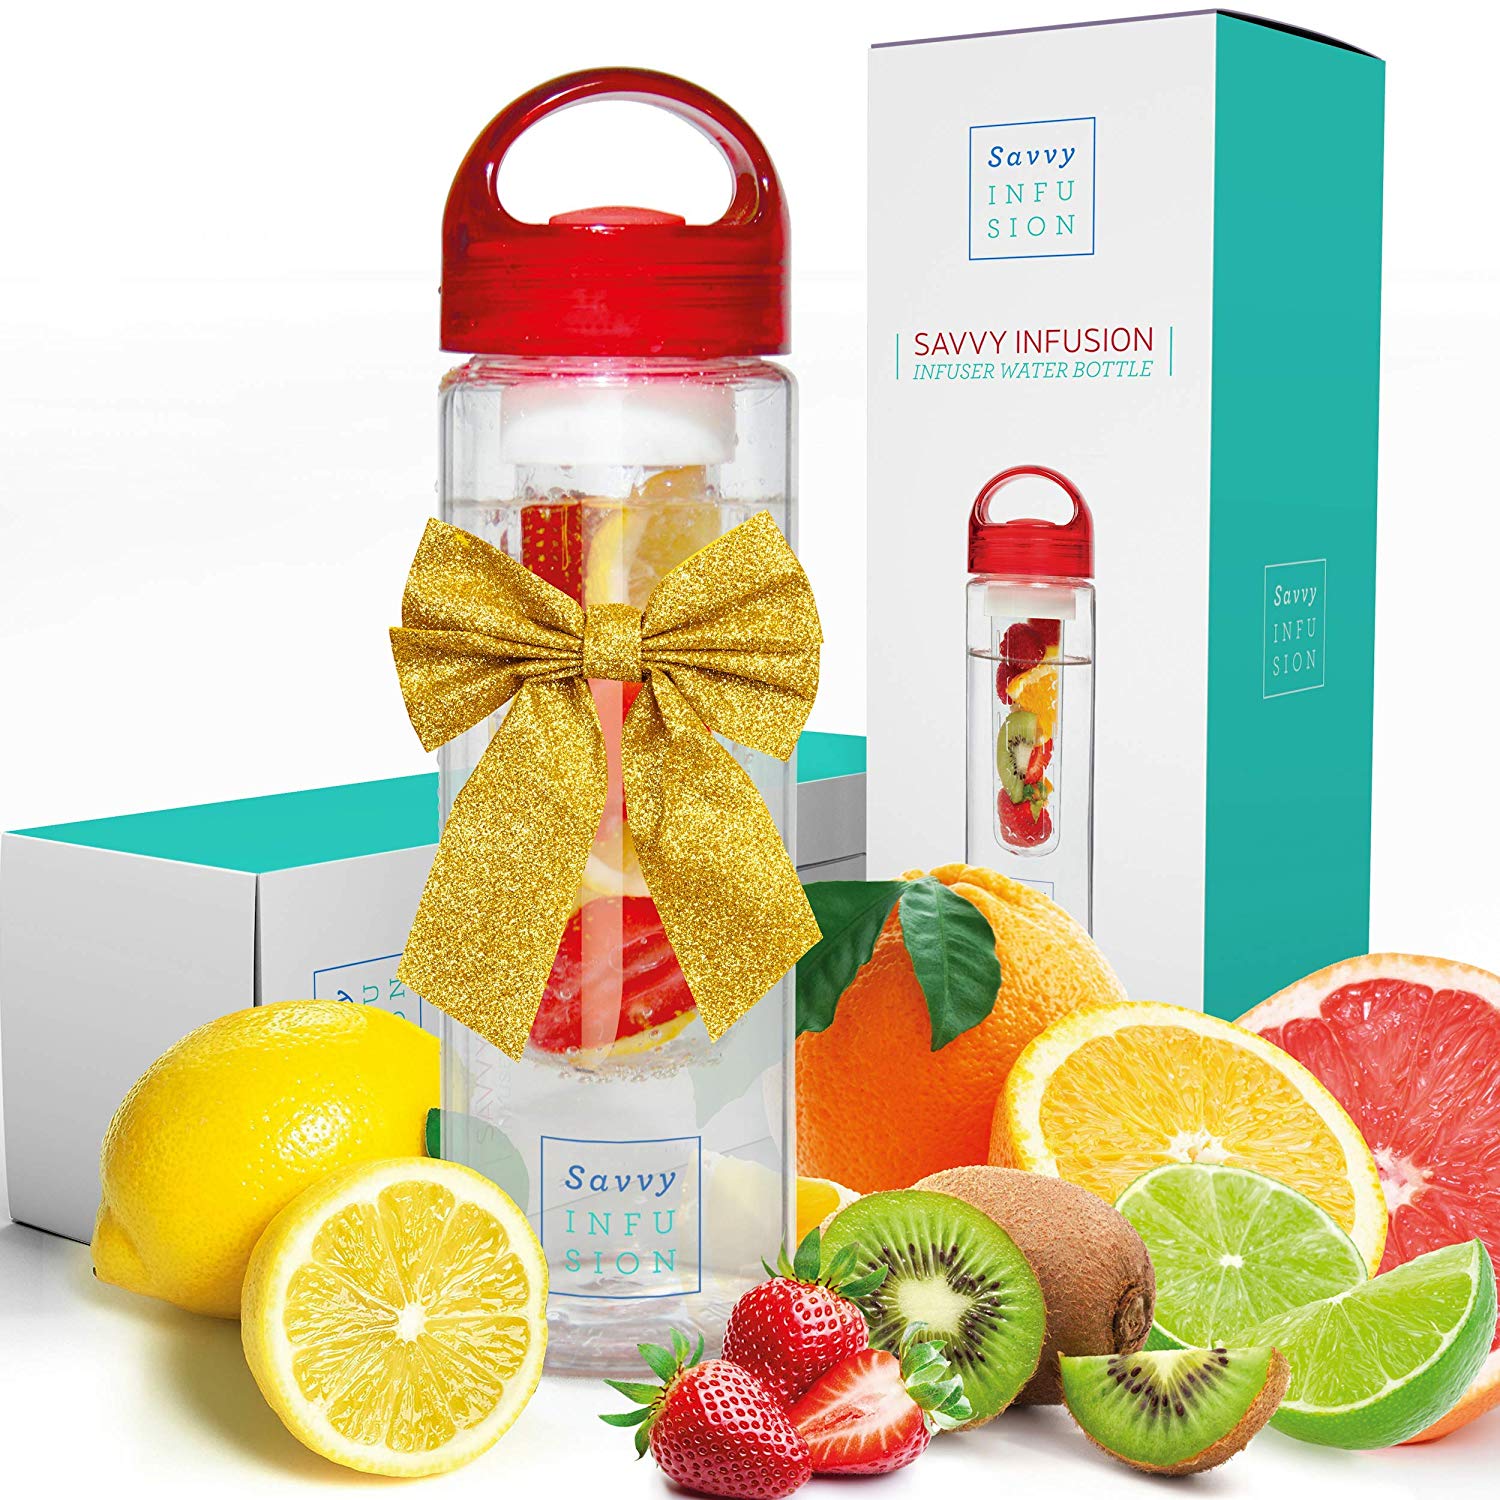 An Infusion Water Bottle